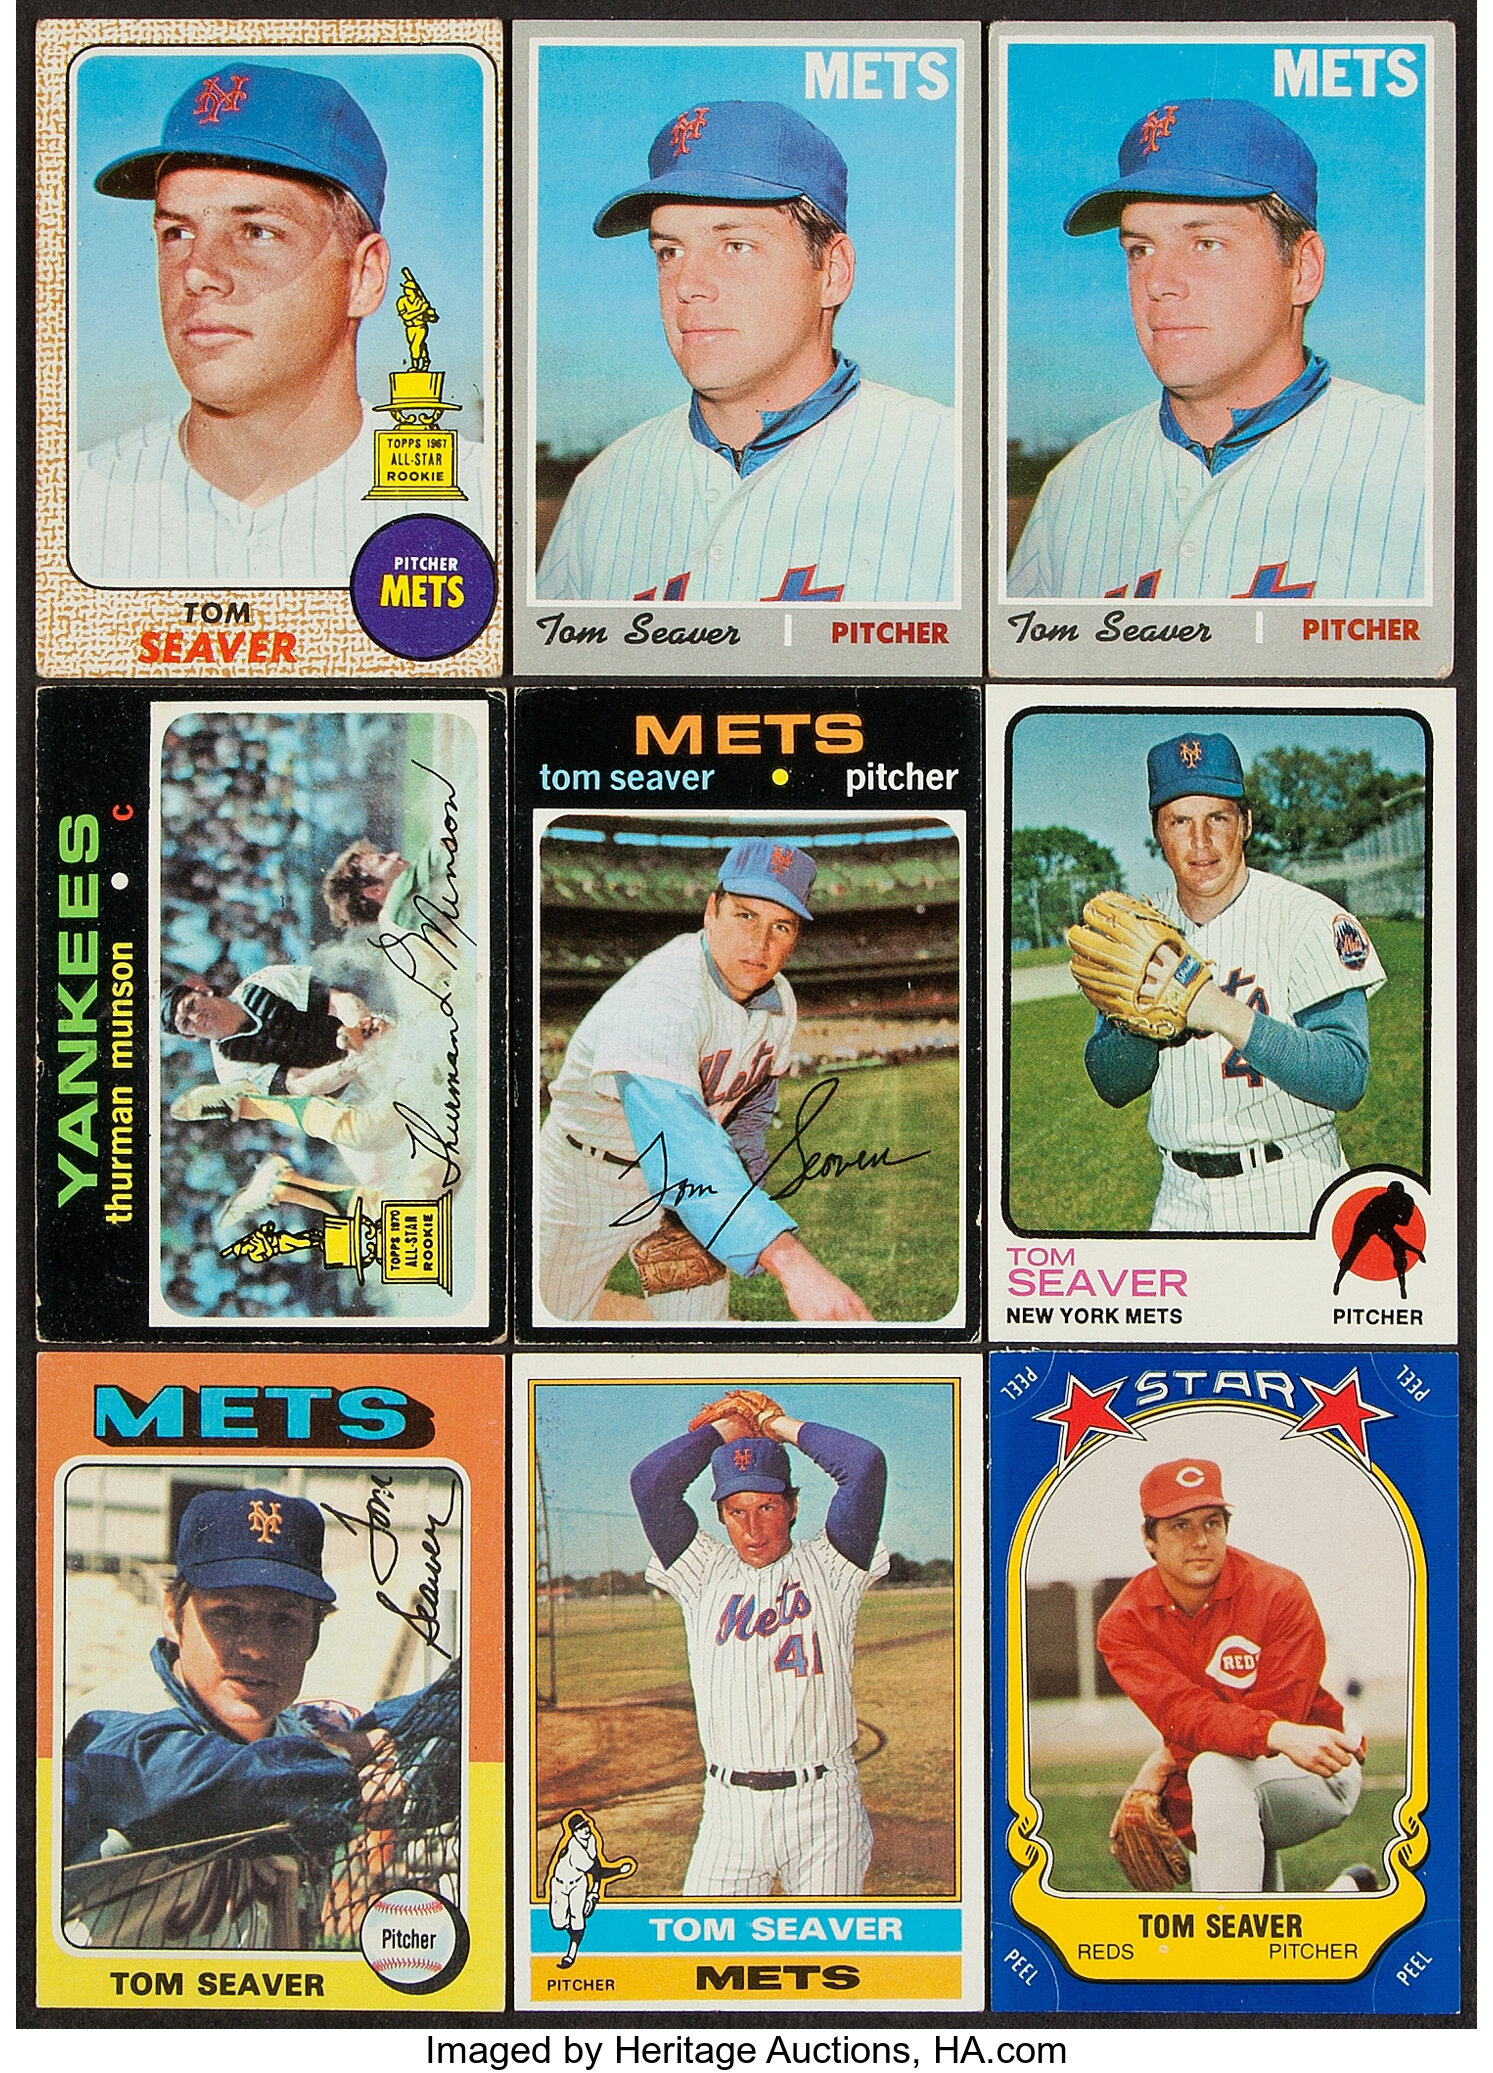 Lot of (3) Tom Seaver Baseball Cards with (2) 1975 Topps #370 Tom Seaver  Cards & (1) 1971 Topps #160 Tom Seaver Card